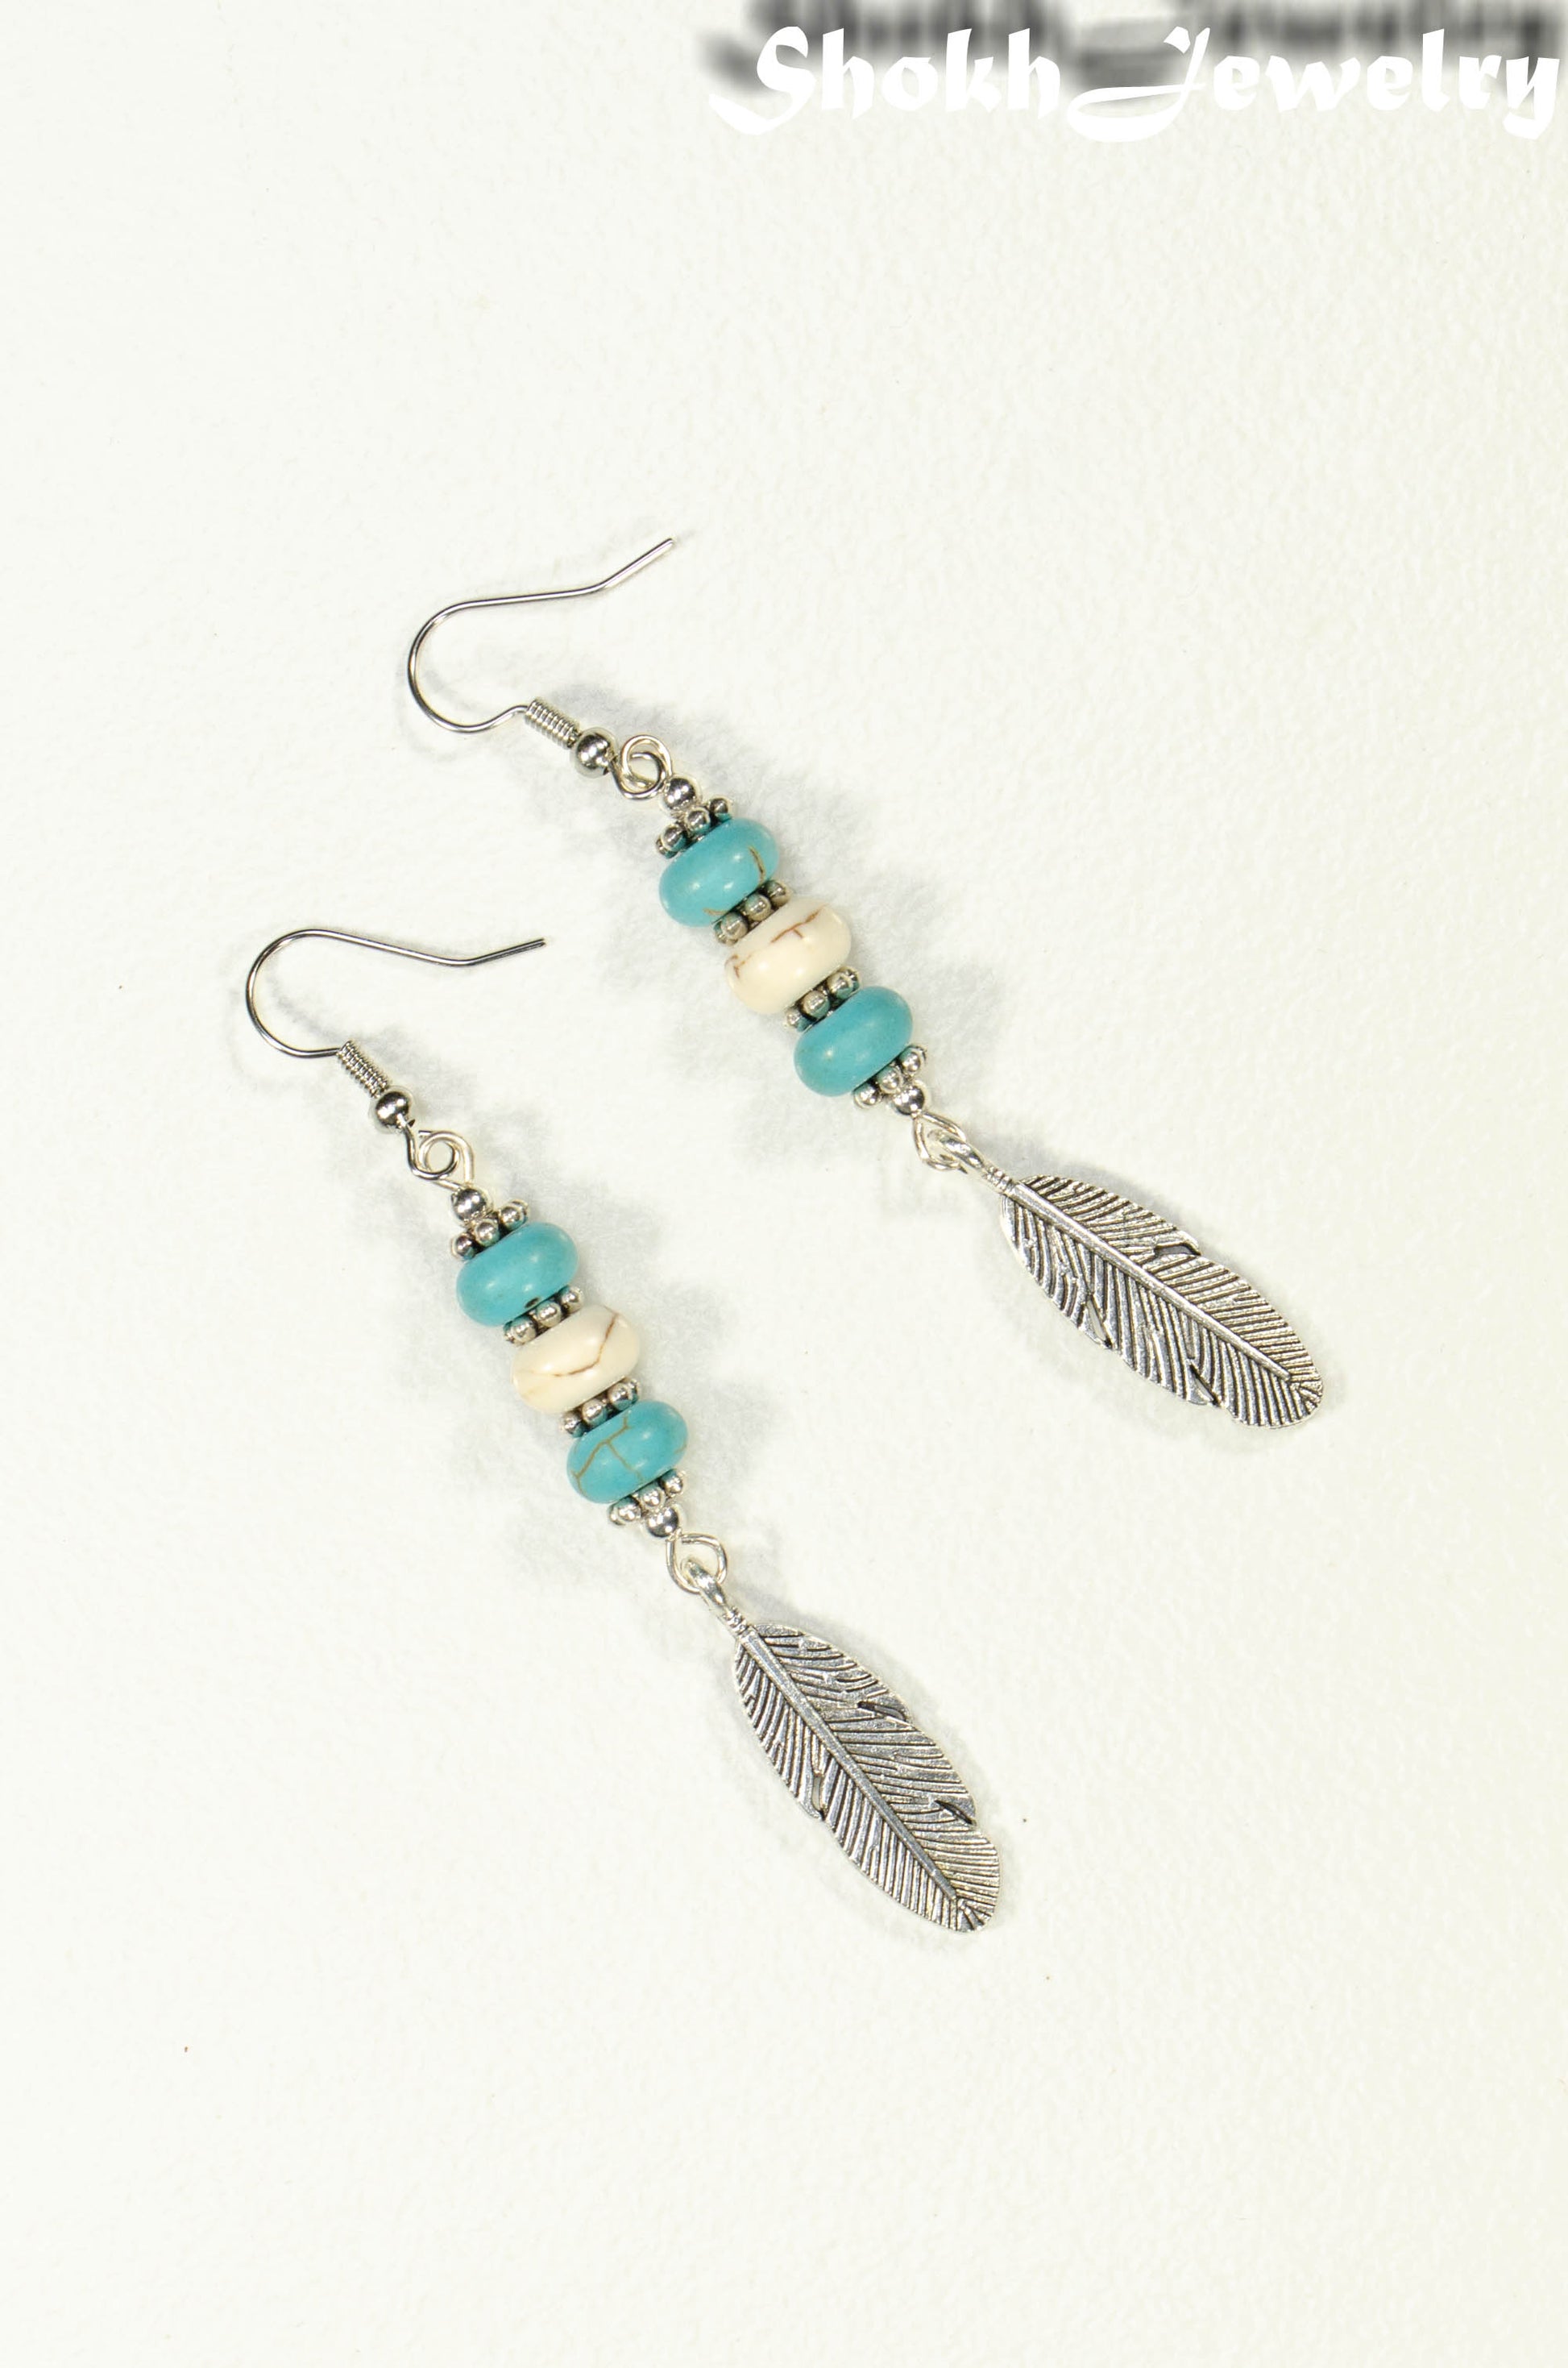 Top view of Statement Turquoise And White Howlite And Feather Earrings.